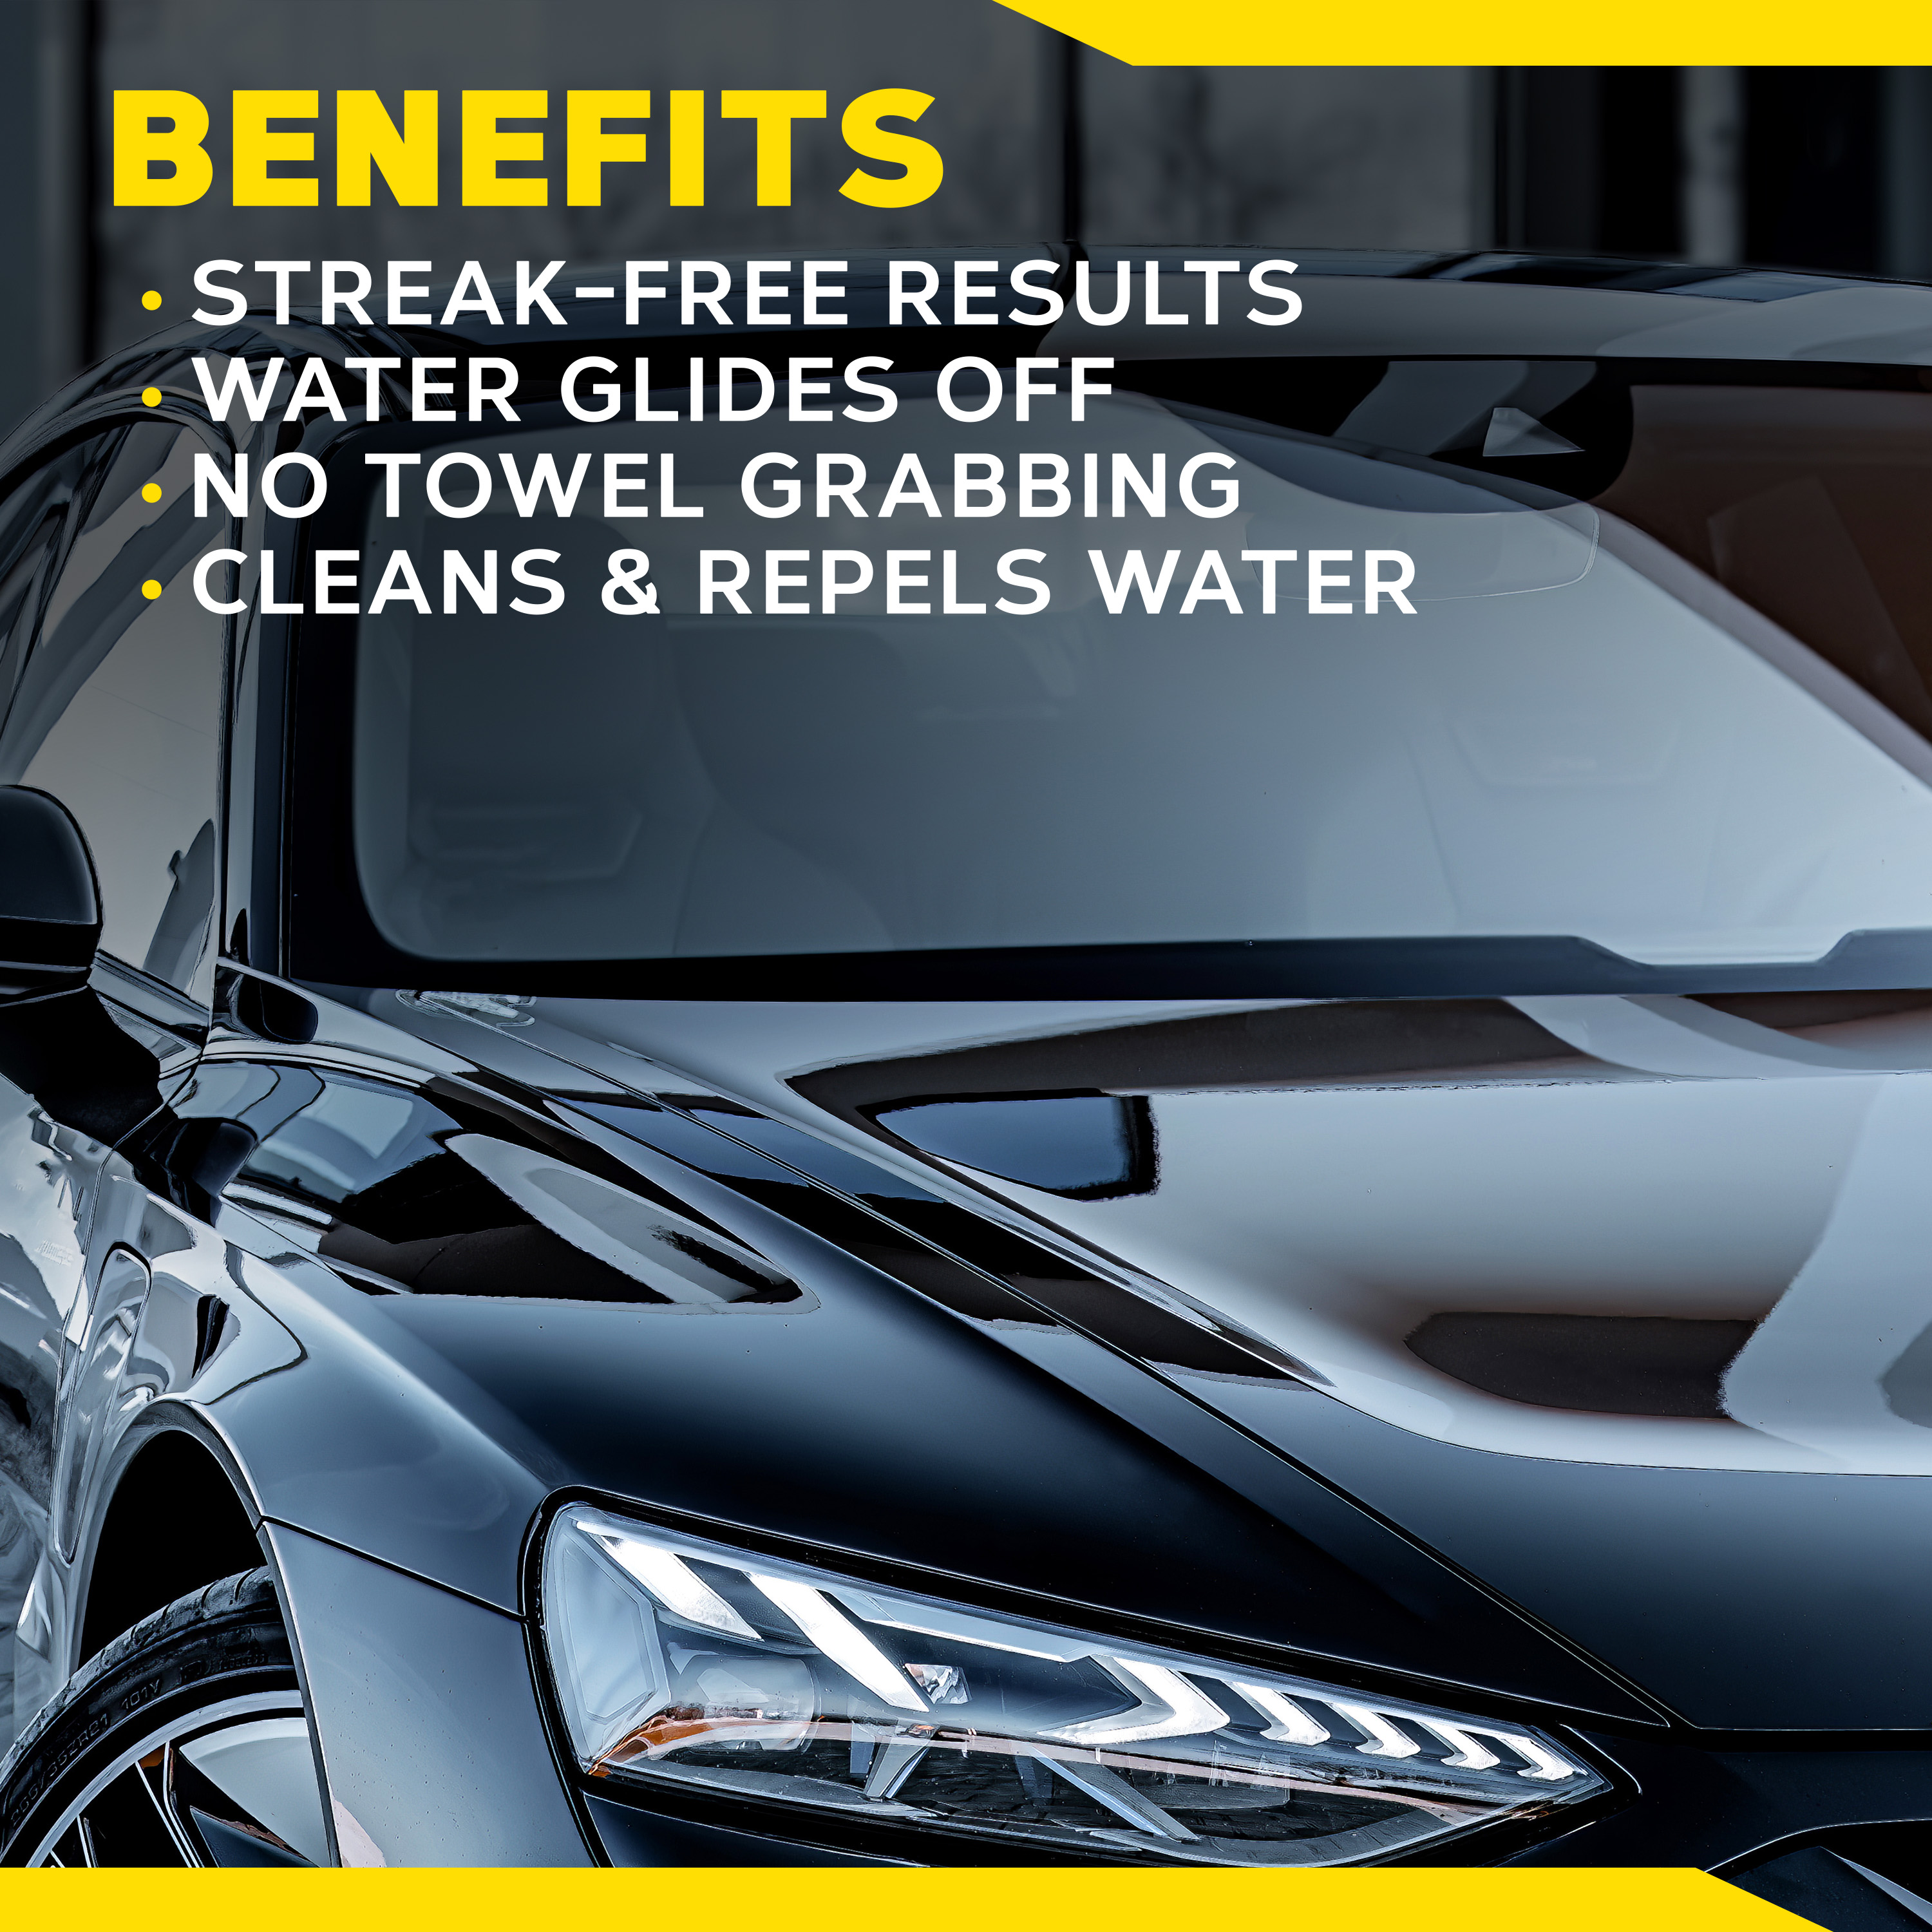  Meguiar's Ultimate Glass Cleaner & Water Repellent - Premium  Glass and Window Cleaner for Quick Cleaning with Hydrophobic Technology  that Acts as a Rain Repellent Improving Visibility in Rain - 16oz 